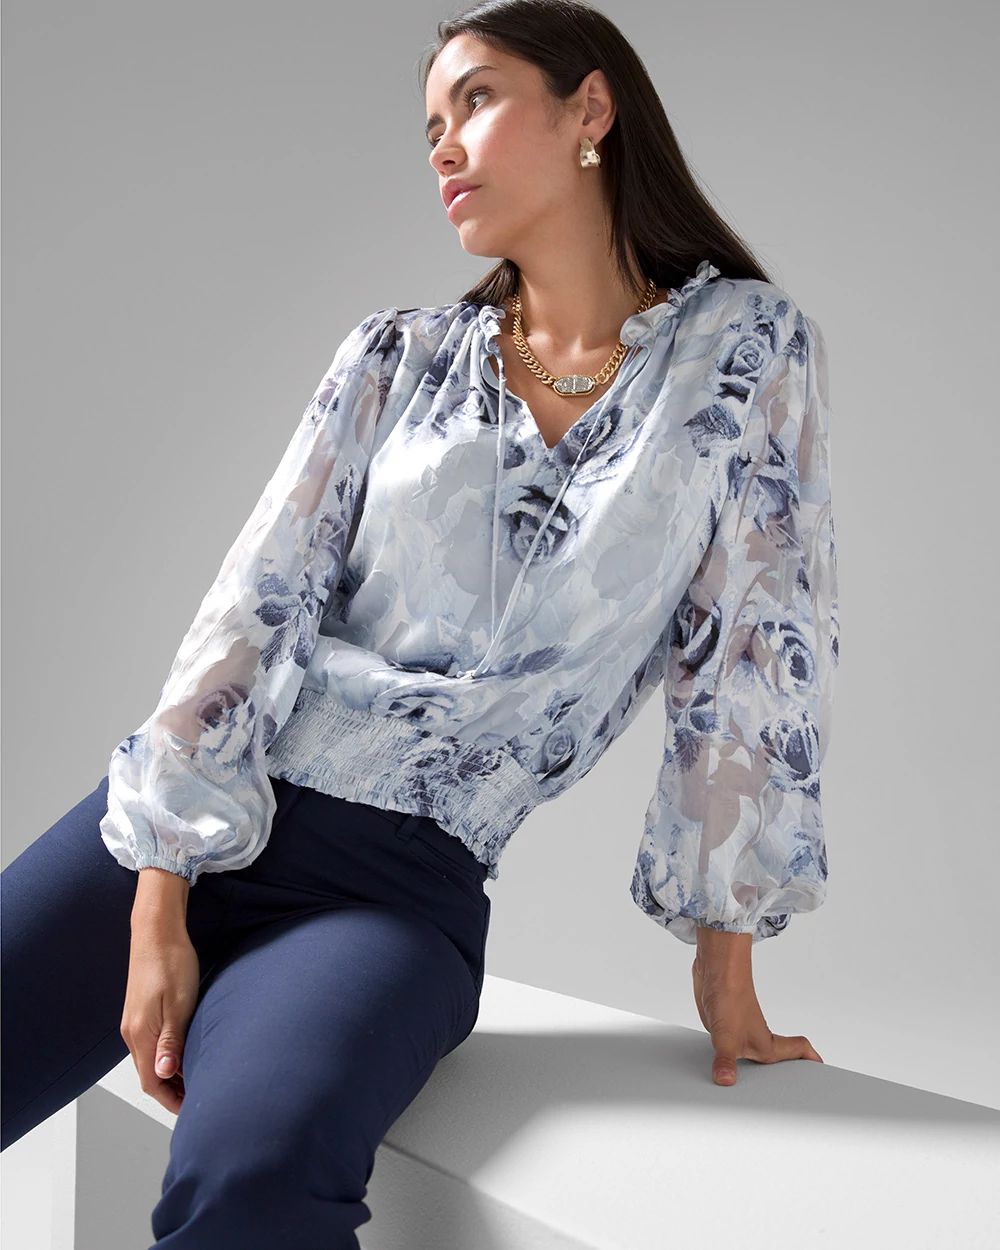 Silk Burnout Smocked Blouse click to view larger image.